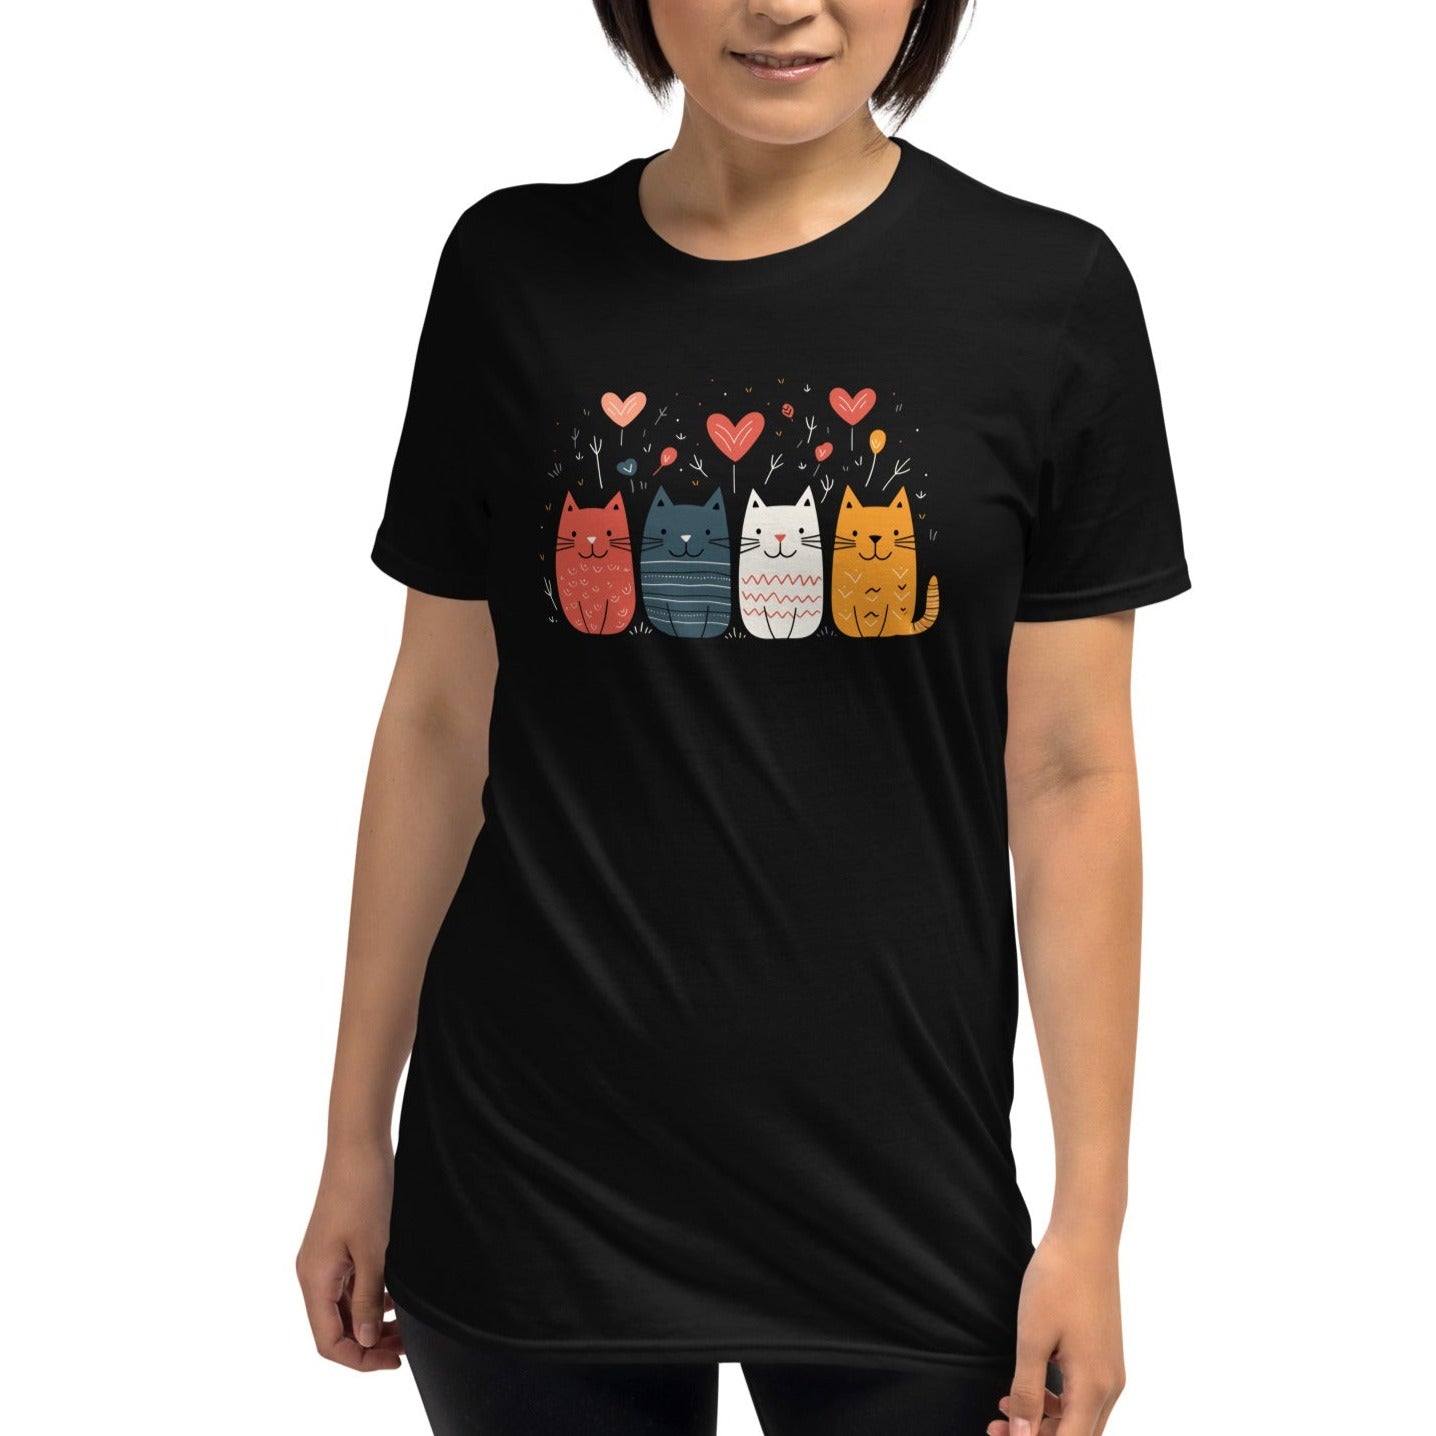 Unisex t-shirt: Four cats with hearts